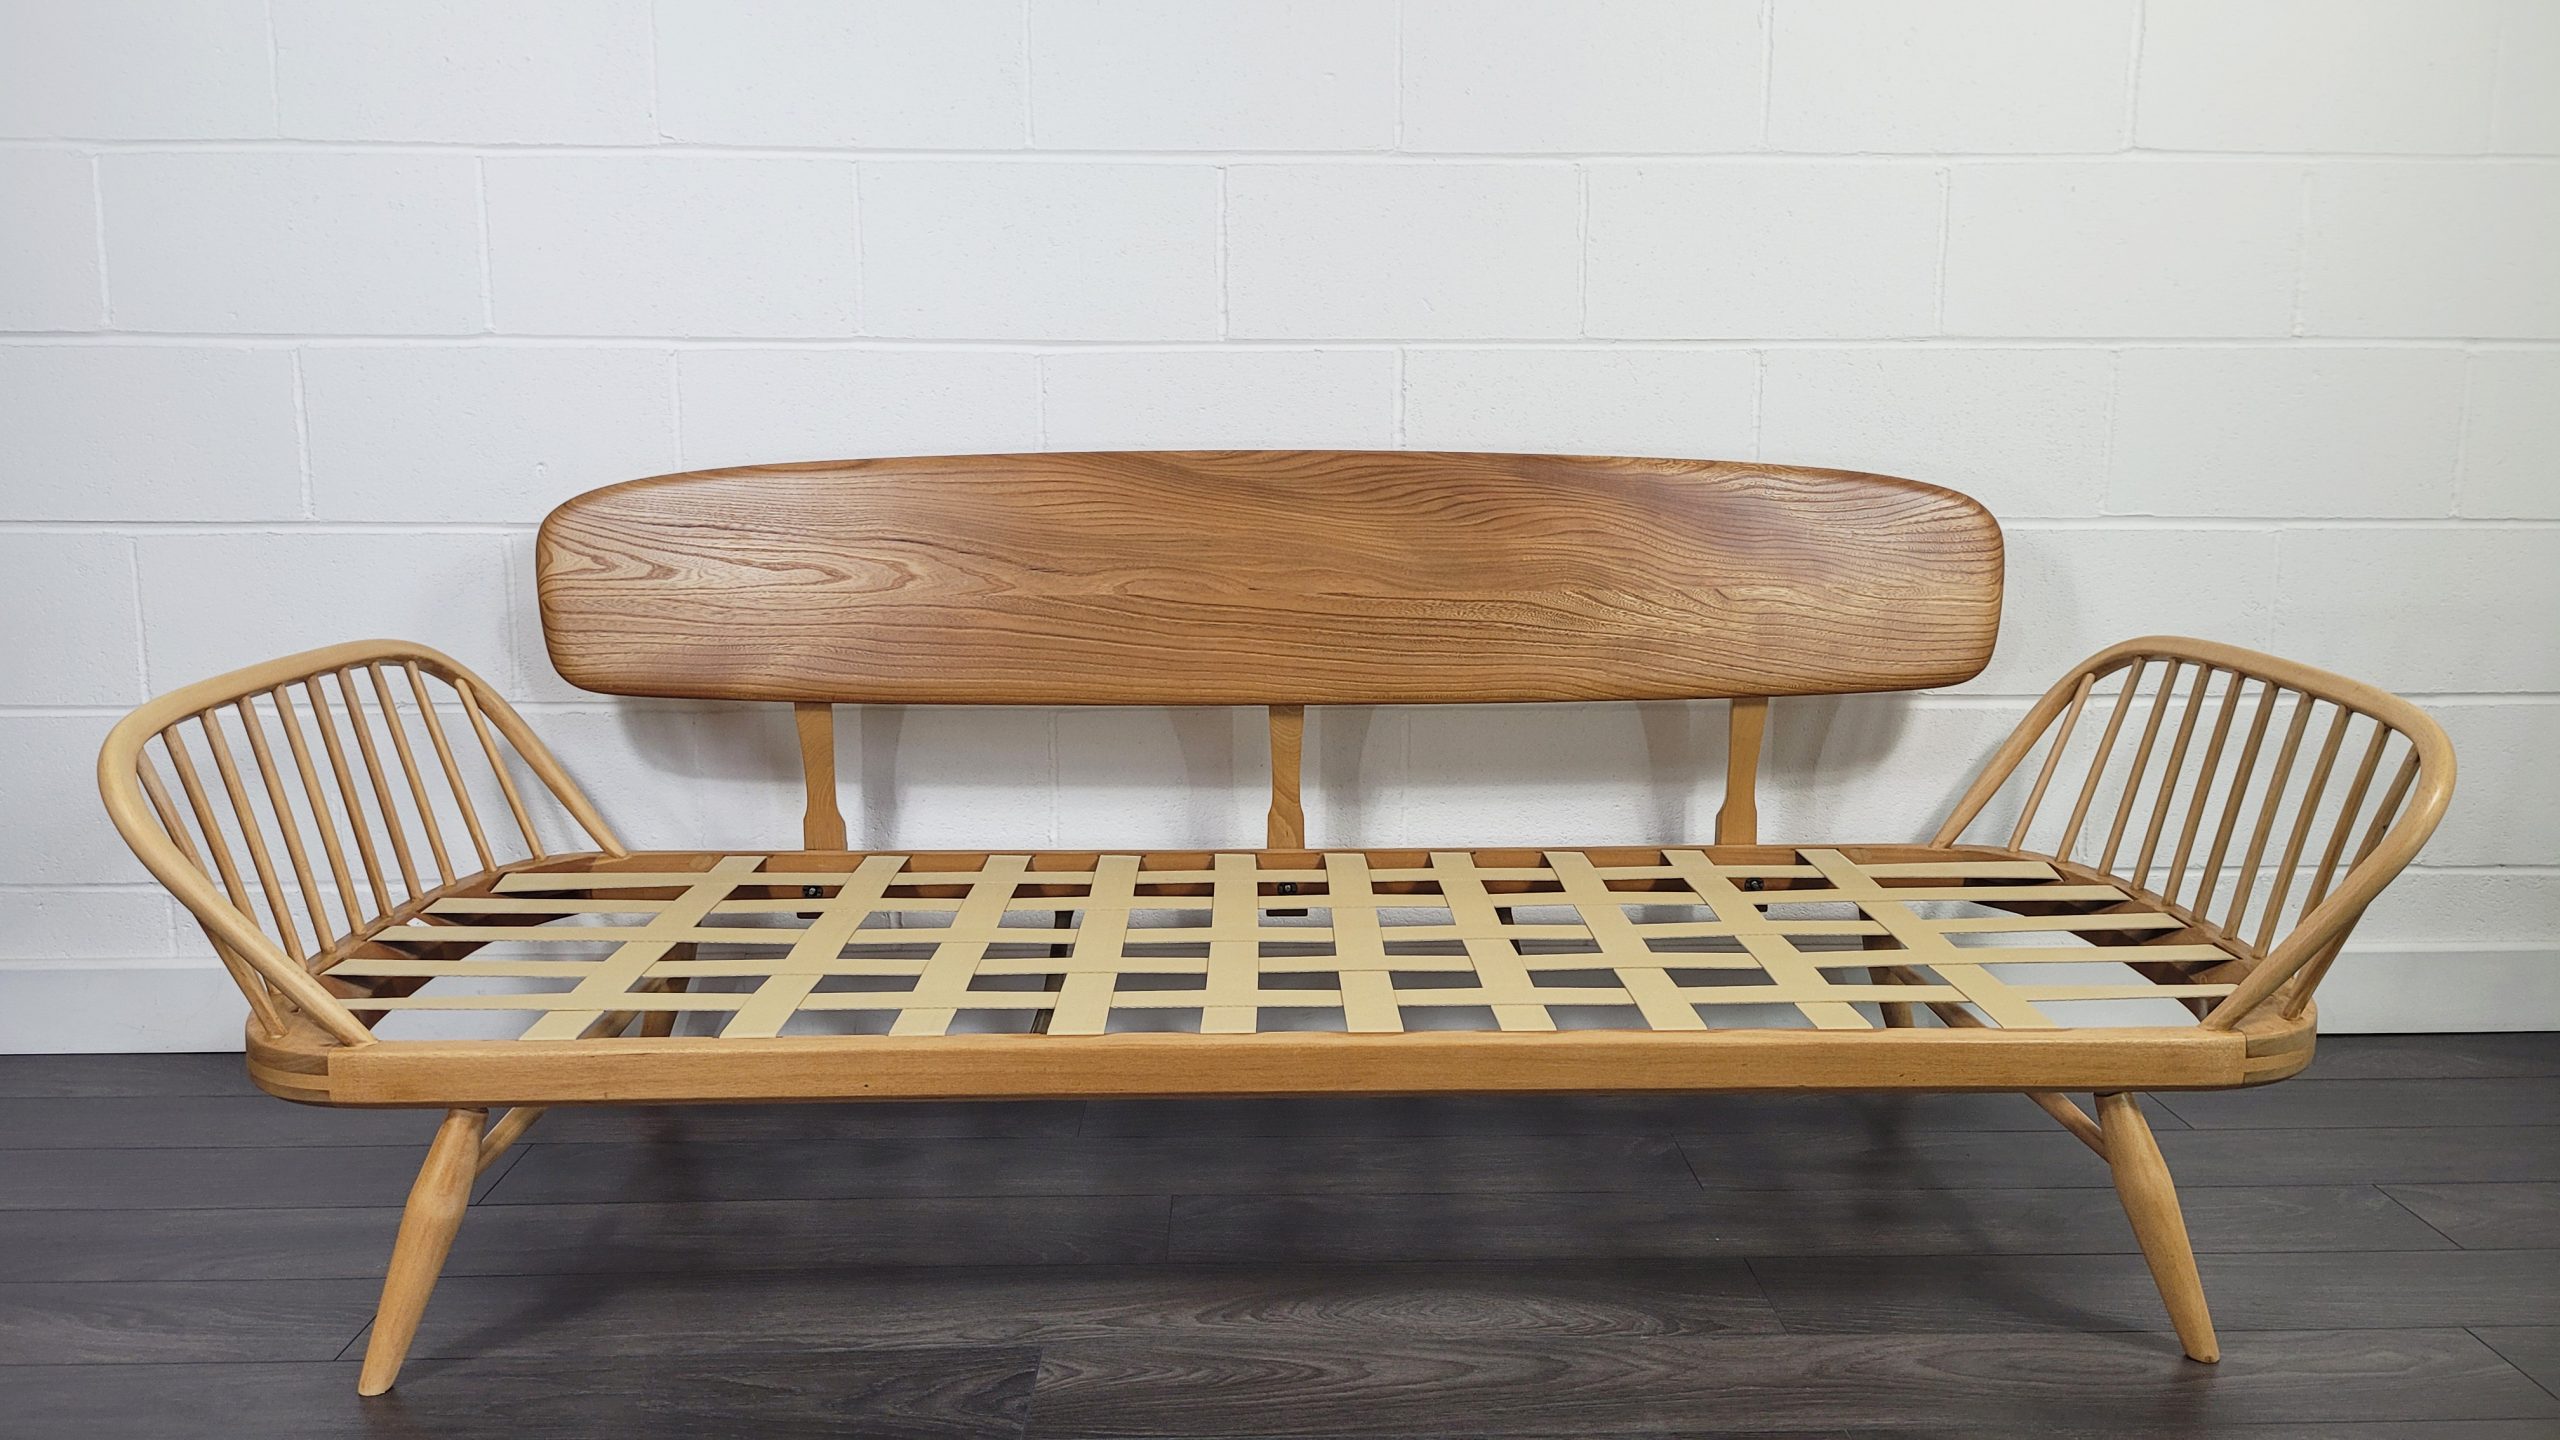 Ercol Day Bed or Studio Couch, 1960s - Hunt Vintage